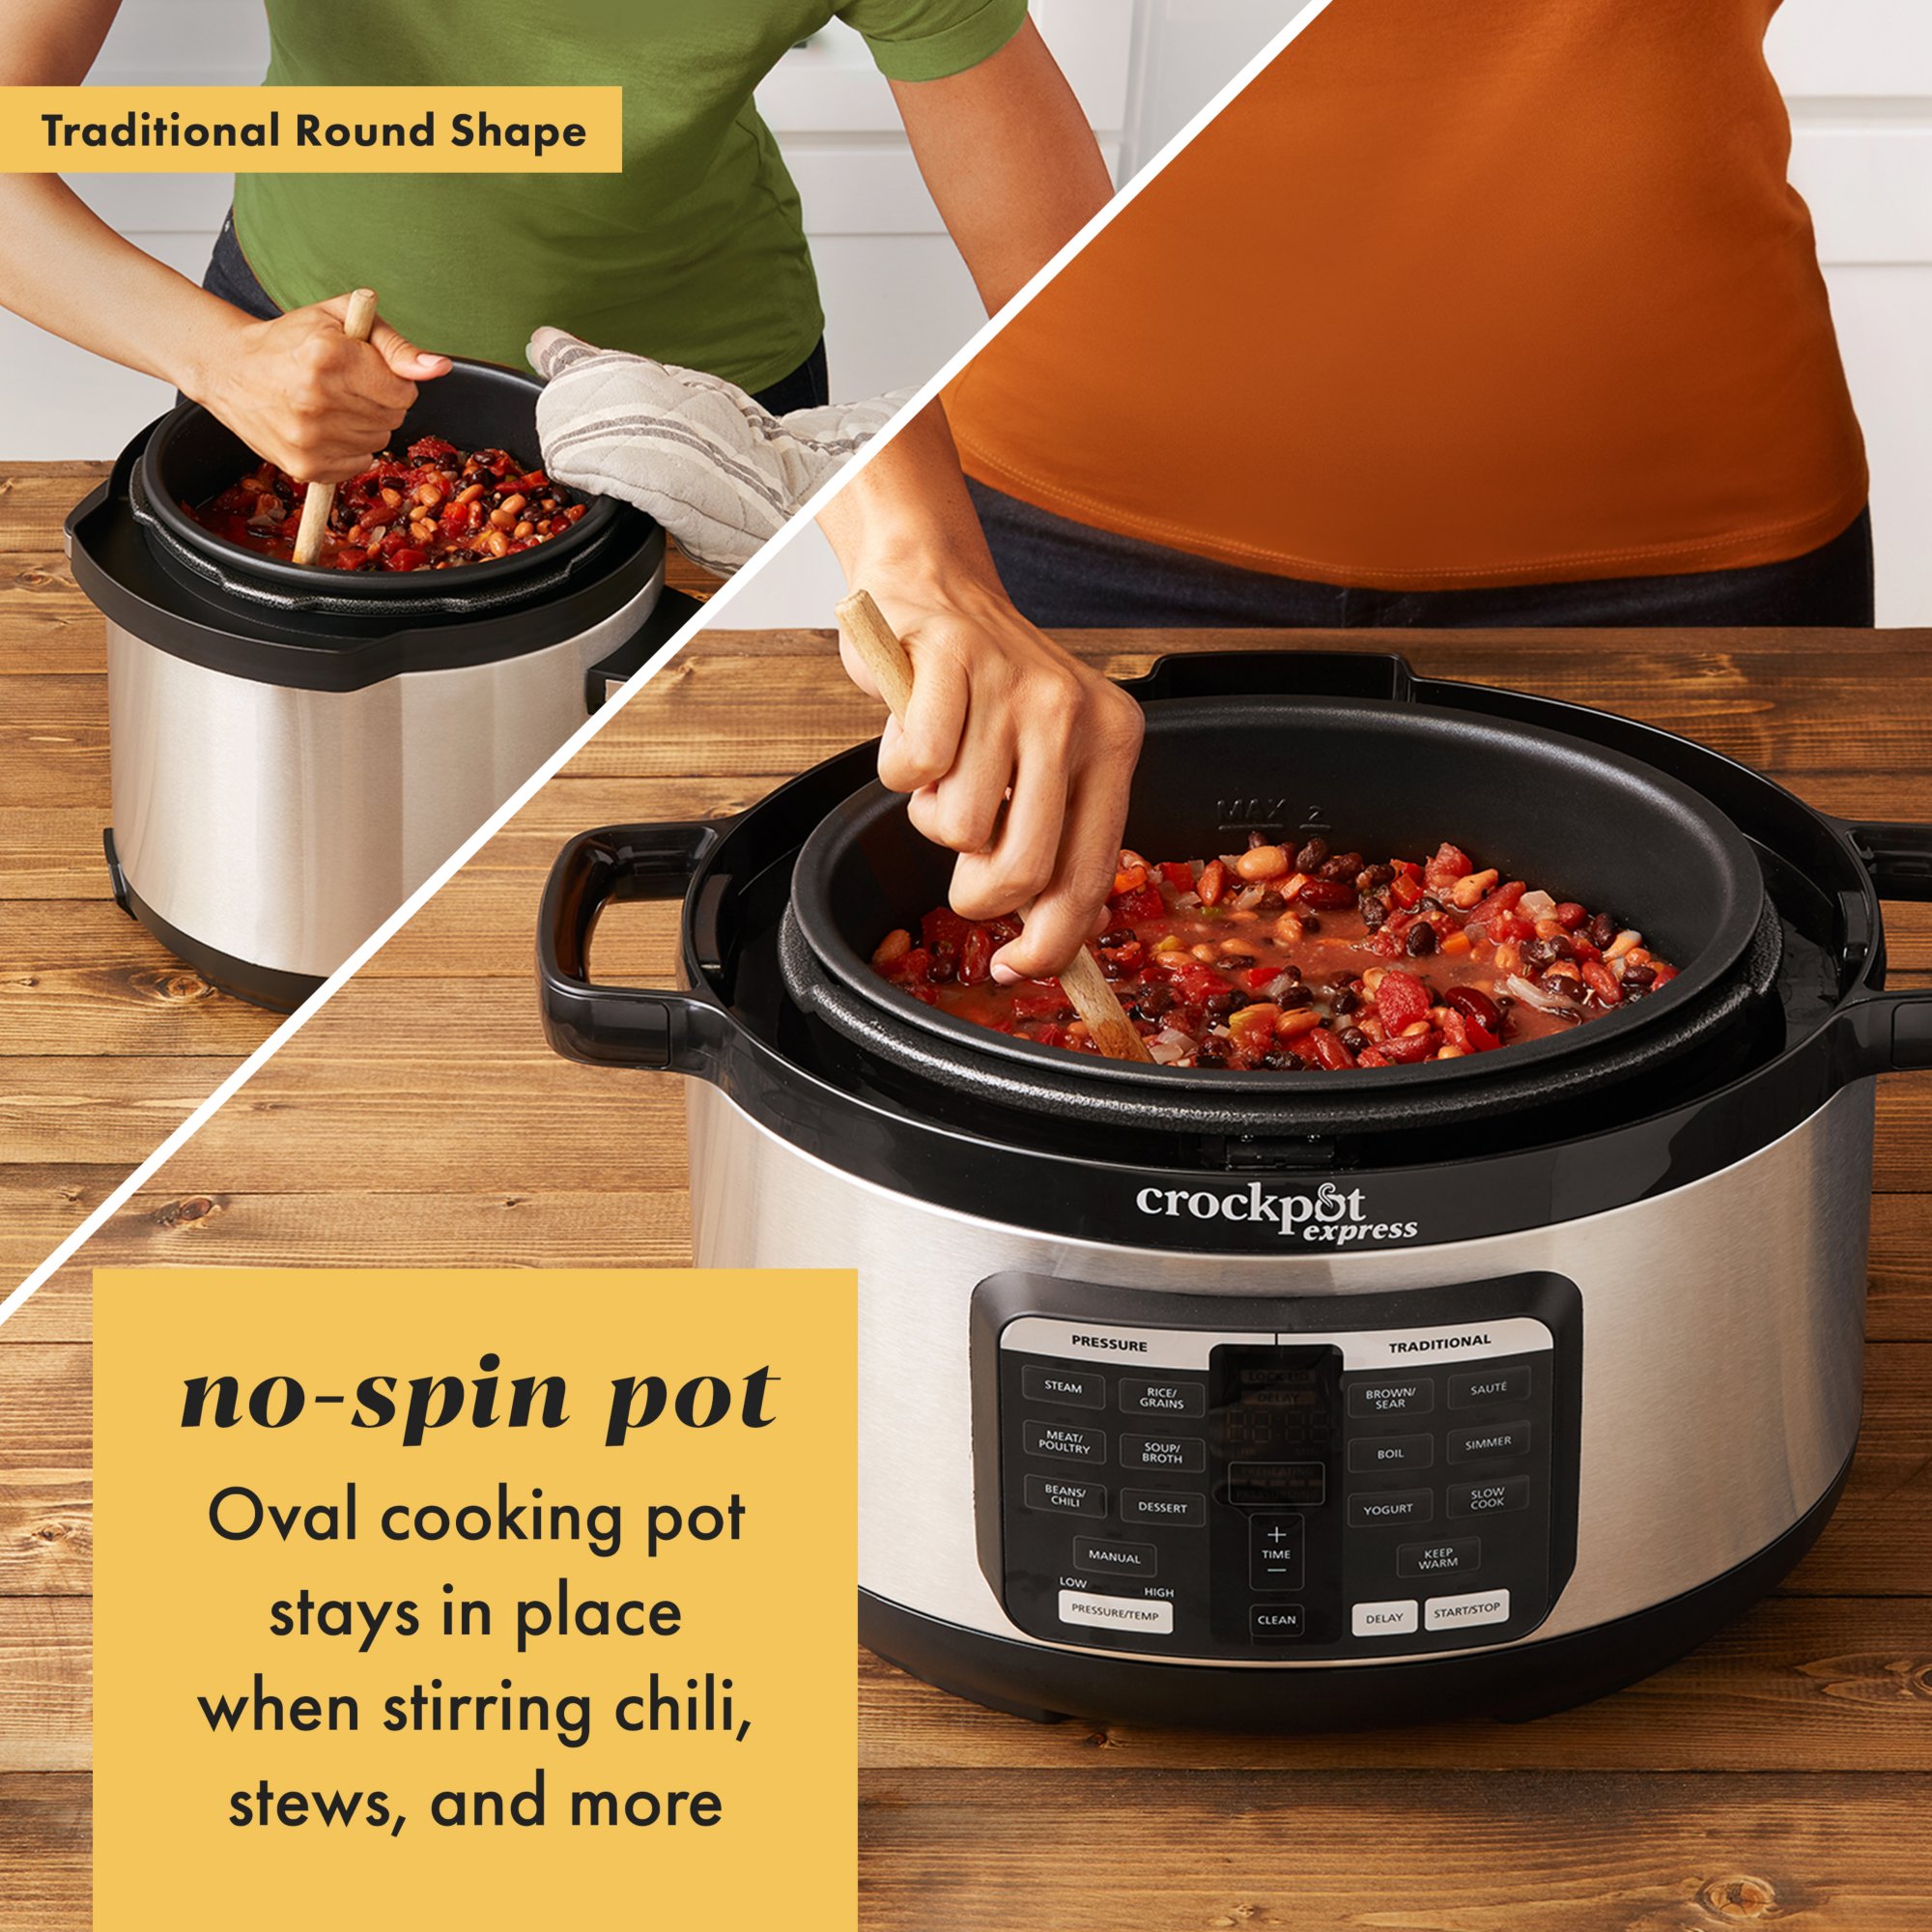 Crock-pot 8-Quart Multi-Use XL Express Crock Programmable Slow Cooker with Manual Pressure, Boil & Simmer, 8qt, Stainless Steel